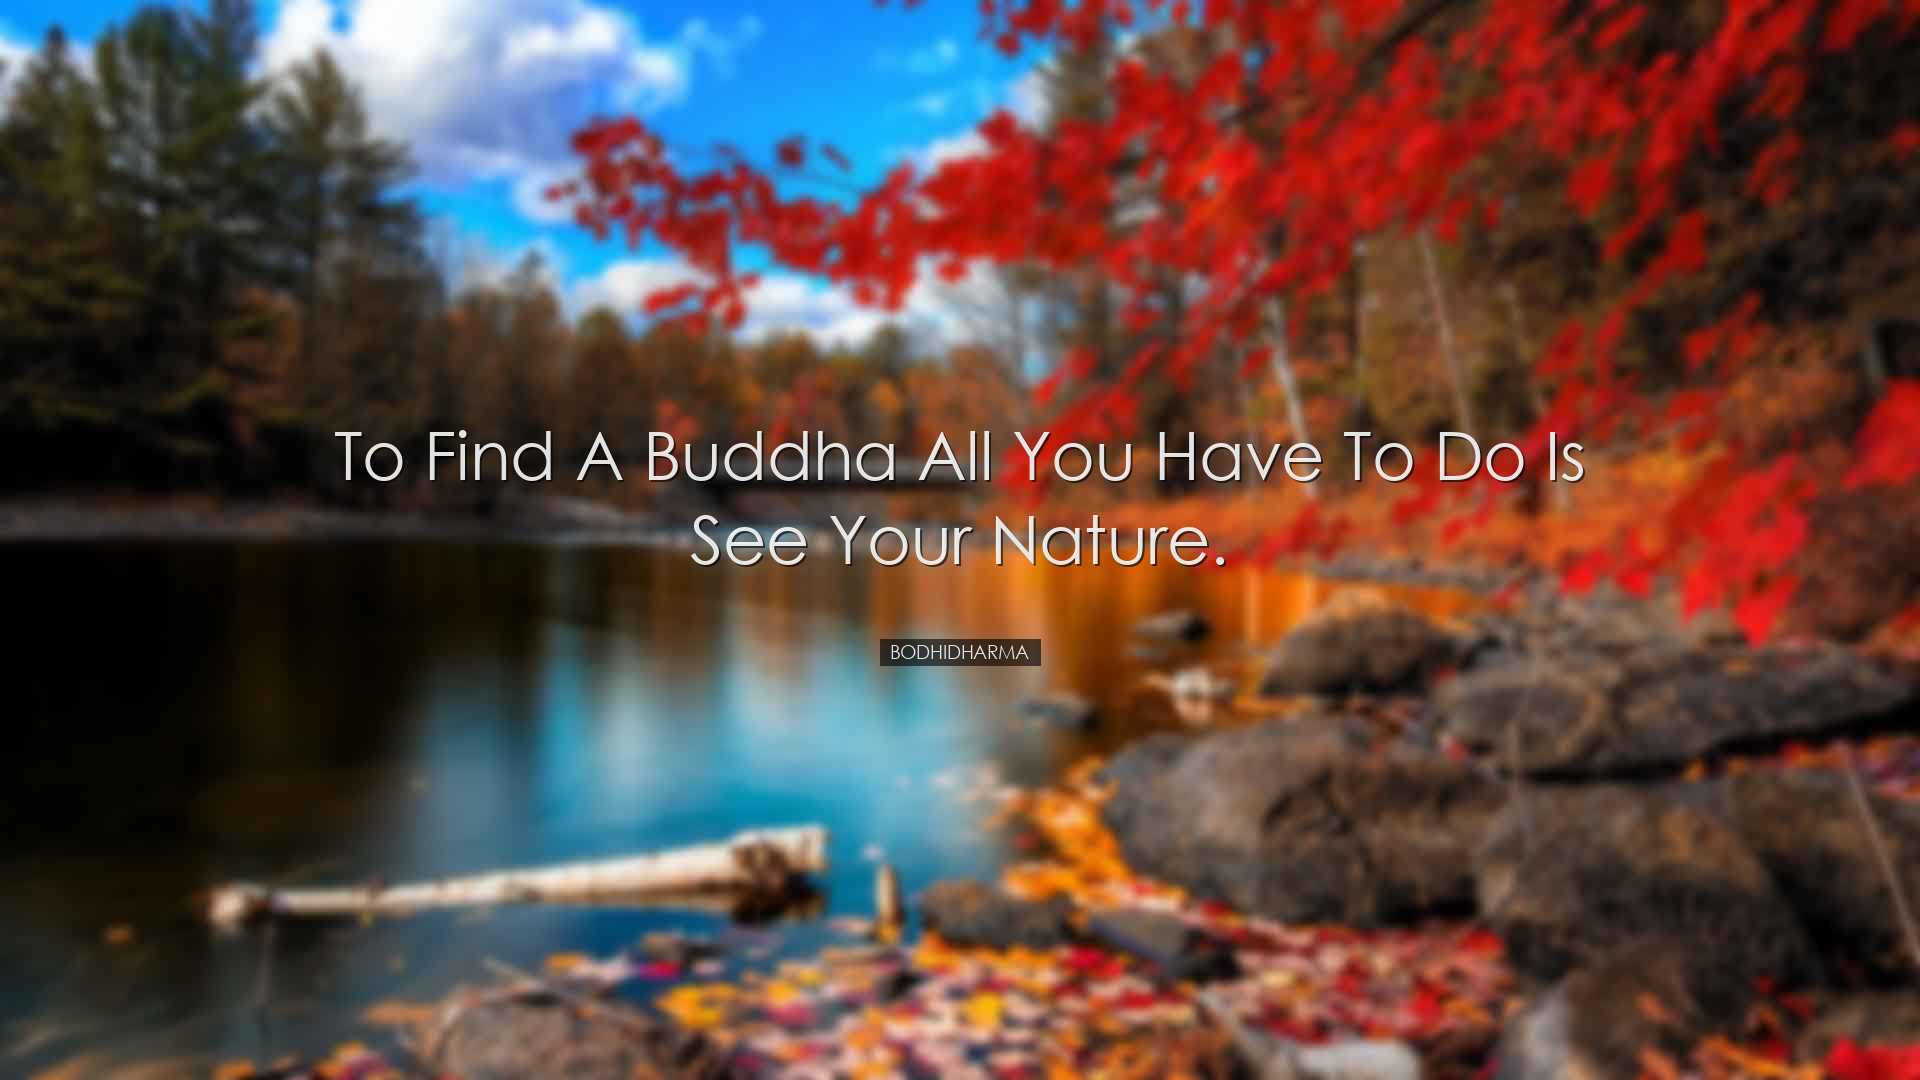 To find a Buddha all you have to do is see your nature. - Bodhidha